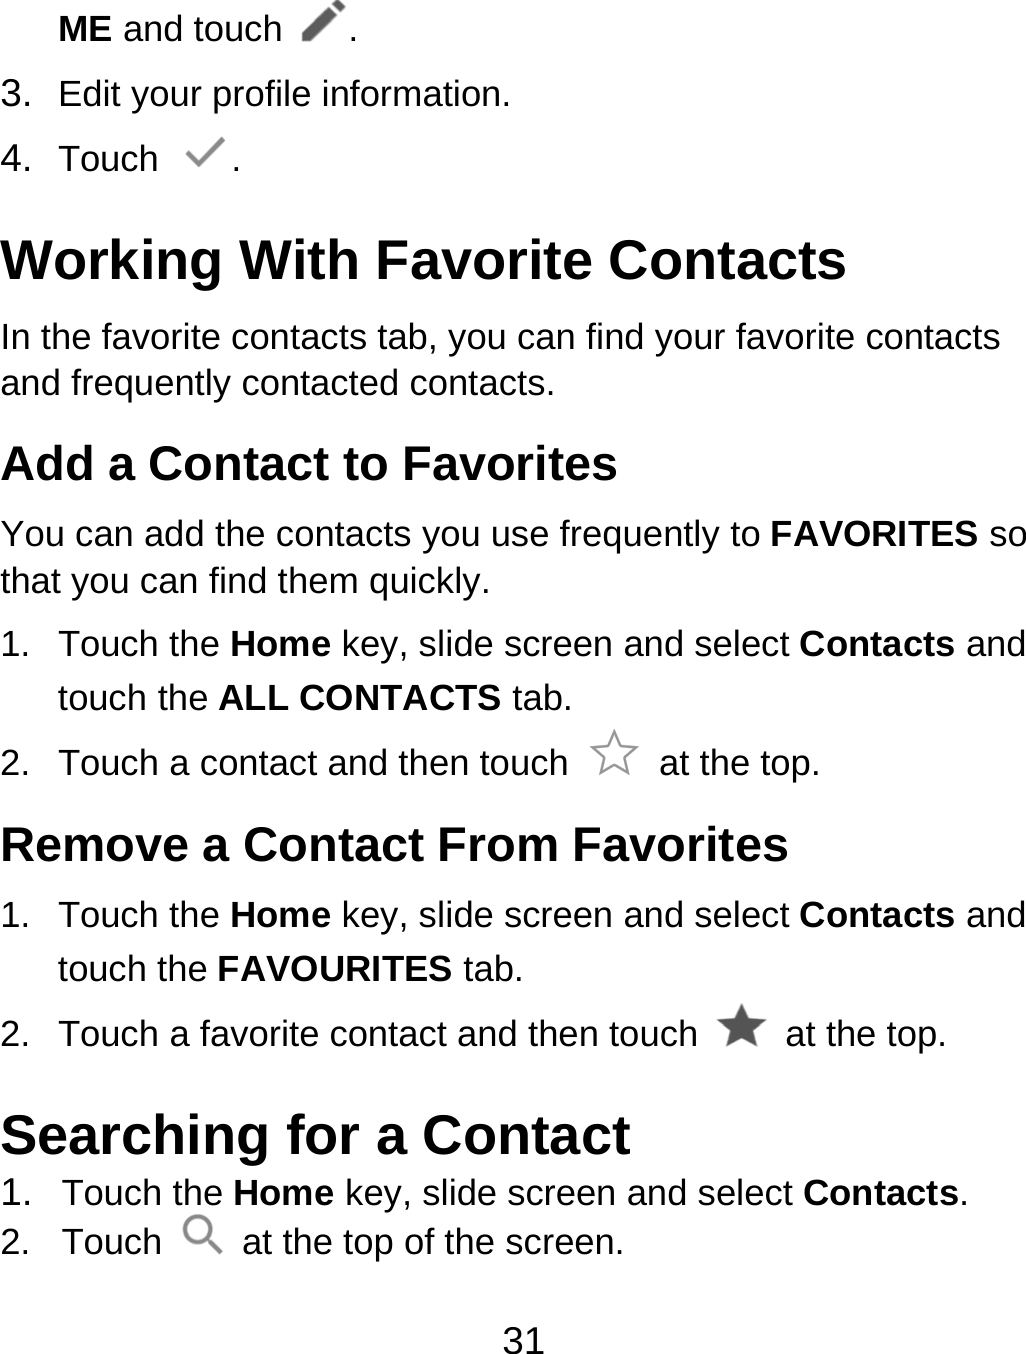 31 ME and touch . 3.  Edit your profile information. 4.  Touch  . Working With Favorite Contacts In the favorite contacts tab, you can find your favorite contacts and frequently contacted contacts. Add a Contact to Favorites You can add the contacts you use frequently to FAVORITES so that you can find them quickly. 1. Touch the Home key, slide screen and select Contacts and touch the ALL CONTACTS tab. 2.  Touch a contact and then touch   at the top. Remove a Contact From Favorites 1. Touch the Home key, slide screen and select Contacts and touch the FAVOURITES tab. 2.  Touch a favorite contact and then touch    at the top. Searching for a Contact 1.  Touch the Home key, slide screen and select Contacts. 2. Touch    at the top of the screen. 